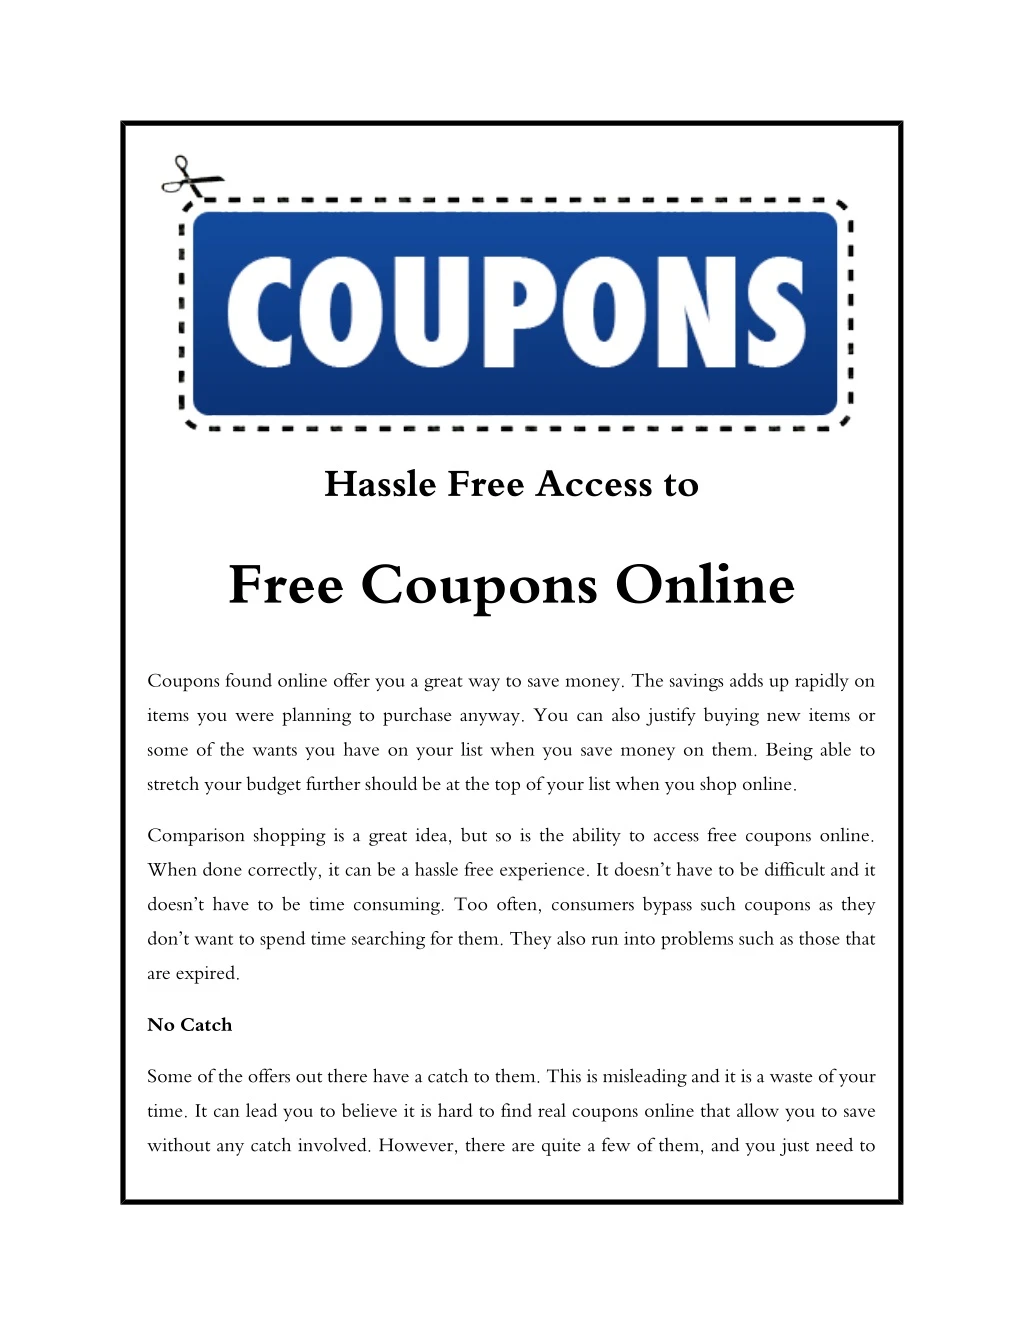 hassle free access to free coupons online